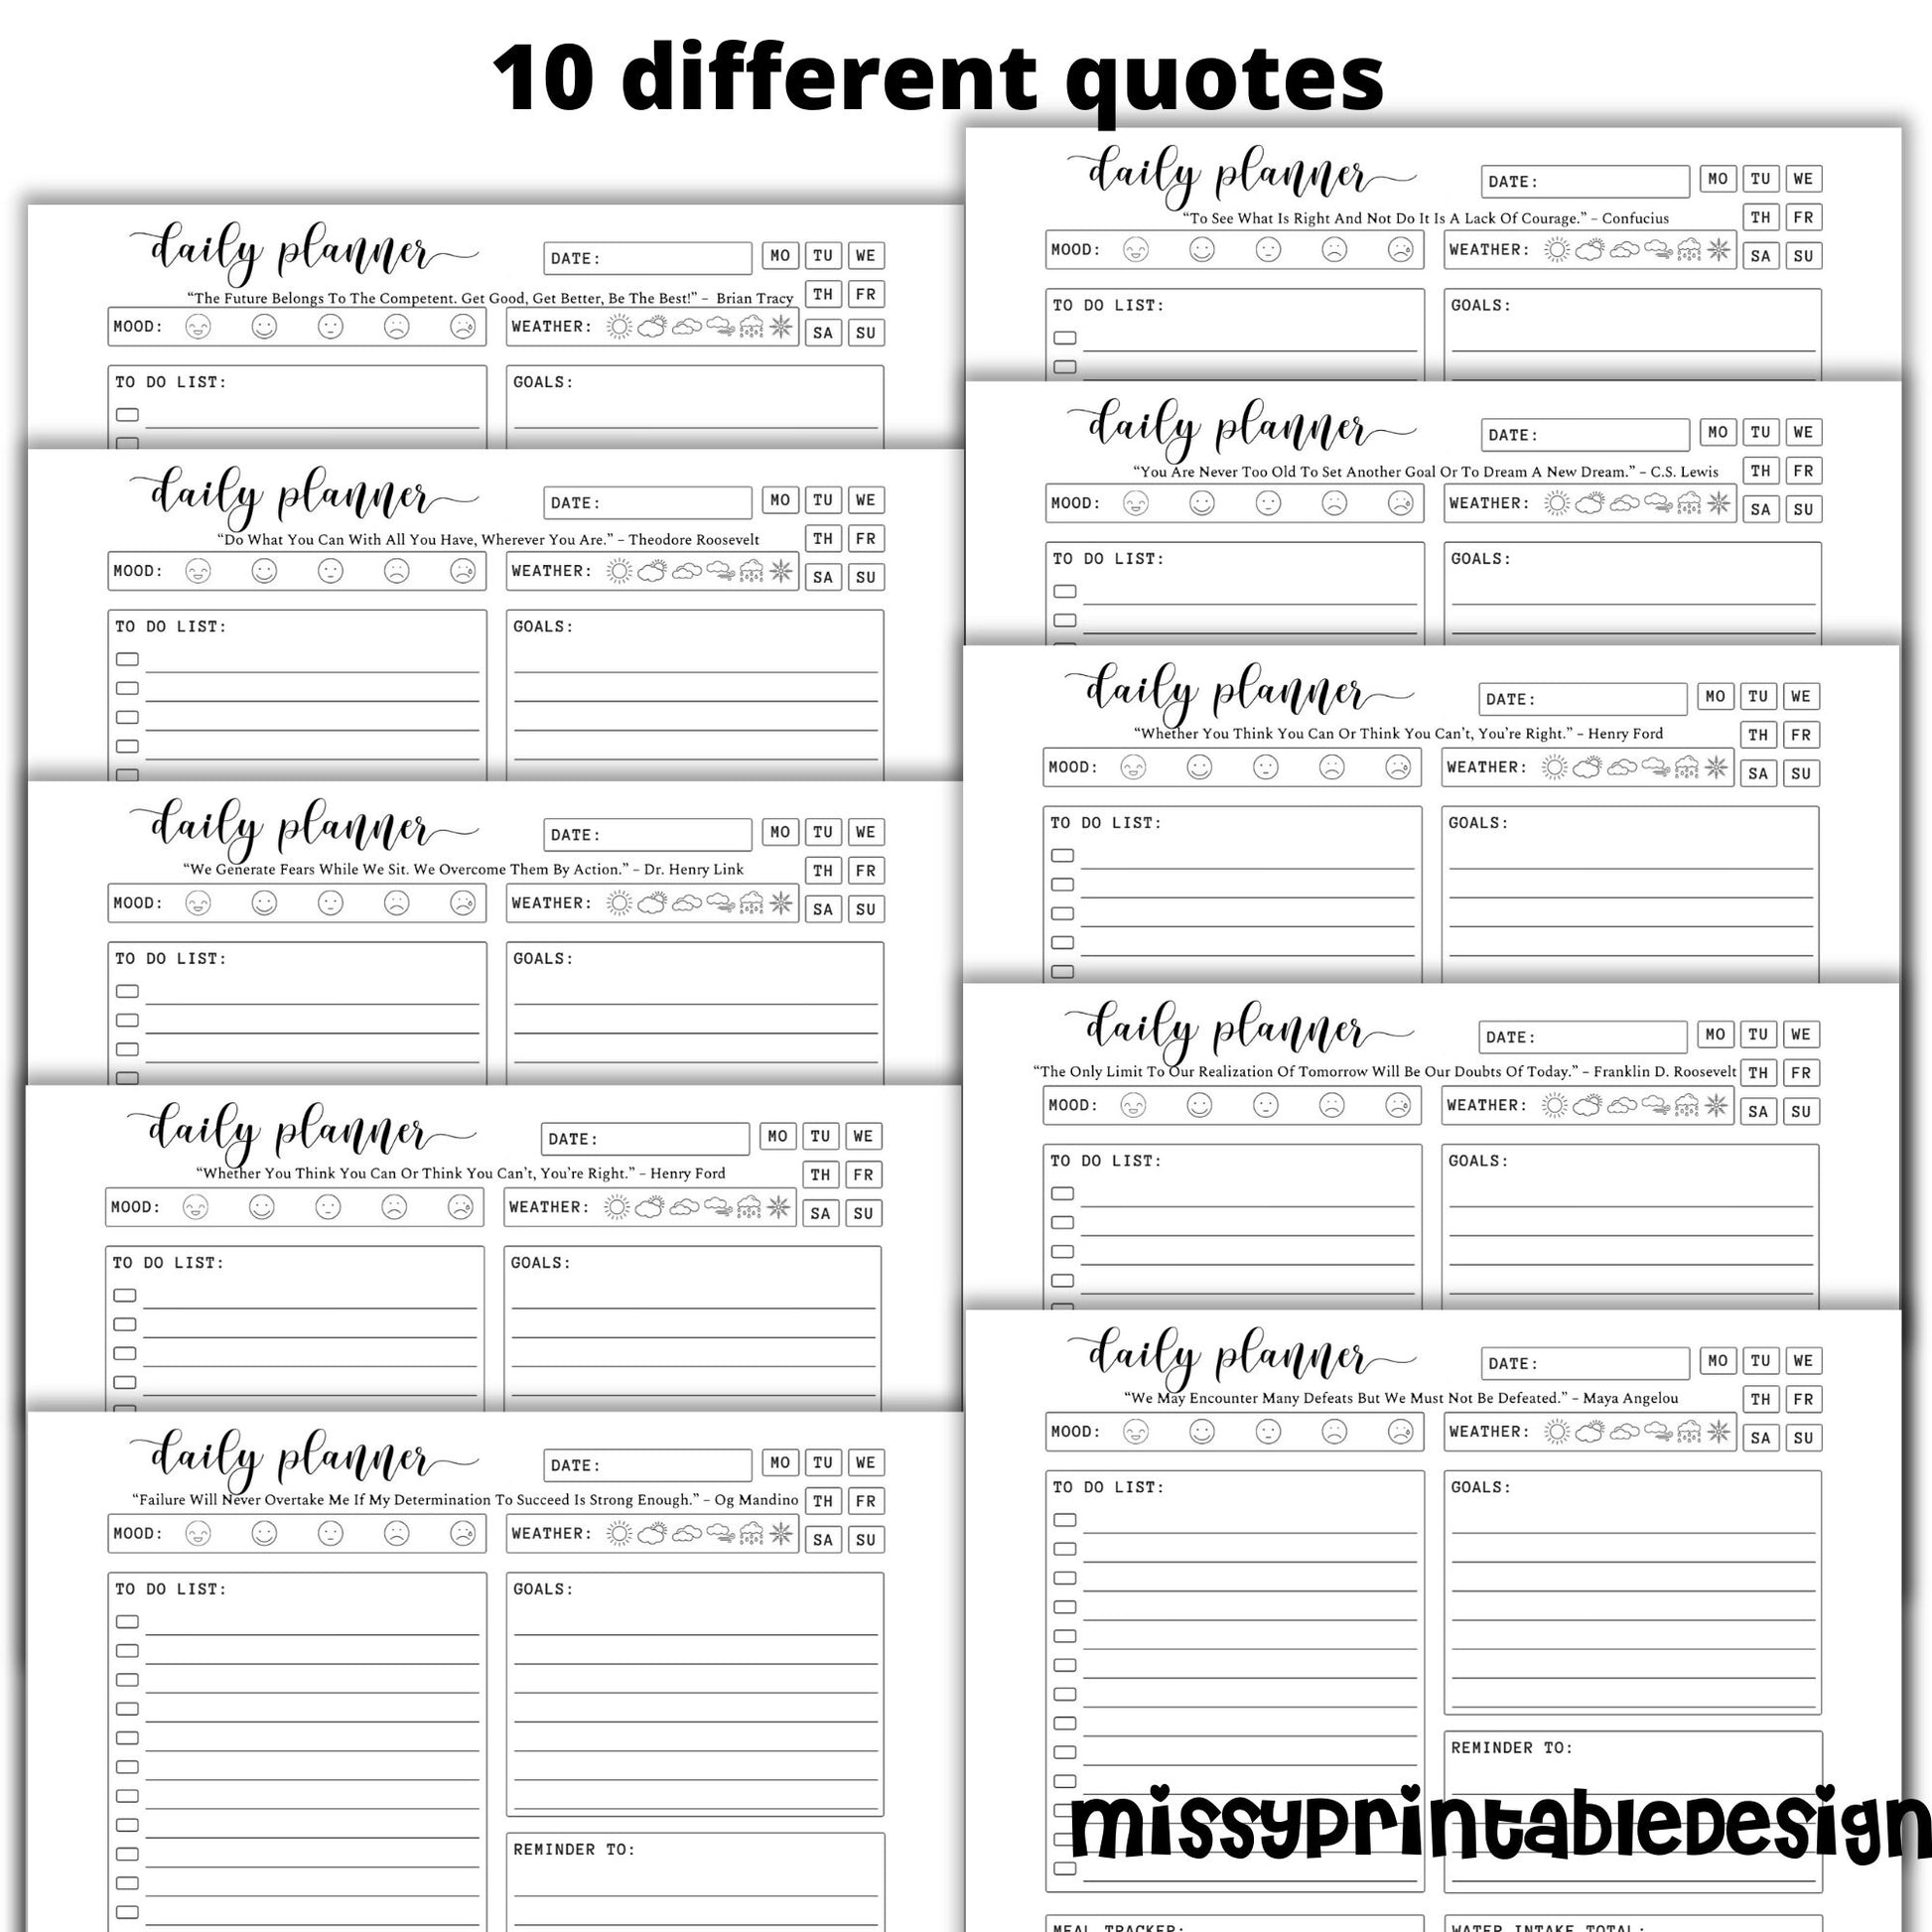 Daily Planner Printable with Quotes, Weekly Planner, Hourly Planner, Planner Inserts, INSTANT DOWNLOAD